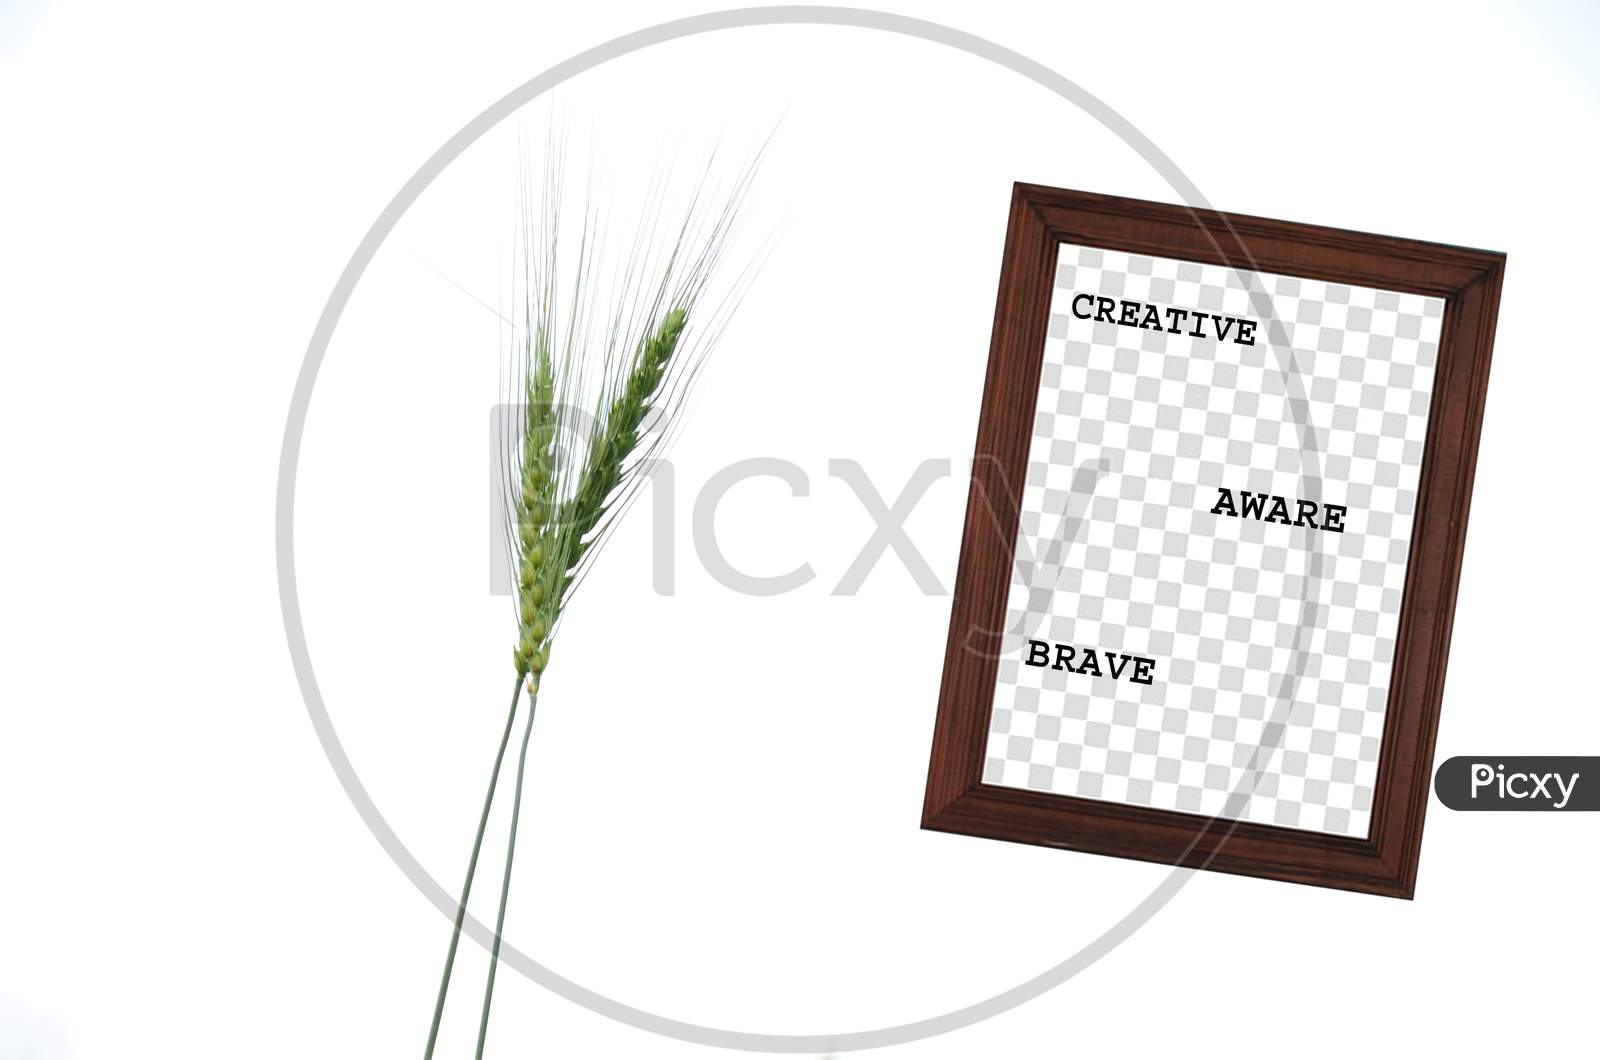 Creative ,Aware,Brave,In The Wooden Frame Mental Health Awareness Concept With Green Wheat Stitch Plant On The White Background.